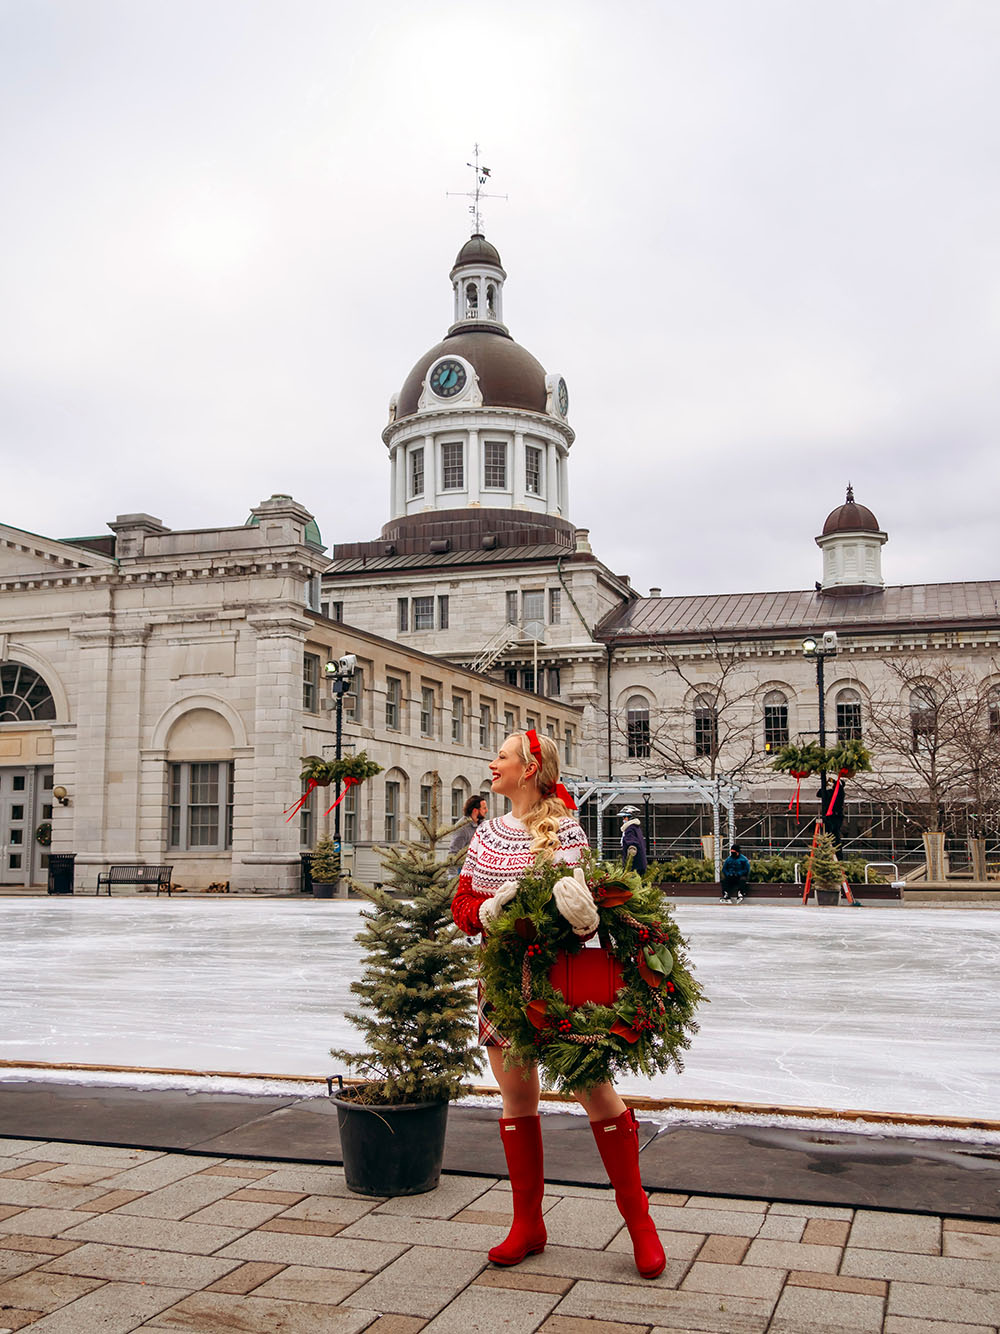 Planning a trip to Kingston, Ontario soon? This guide to the best things to do in Kingston is for you! From the top Kingston activities and attractions, to the must see sights, best restaurants, bars, and everything in between. You won’t want to miss this guide that will help you plan your perfect Kingston getaway. Pictured here: Kingston City Hall